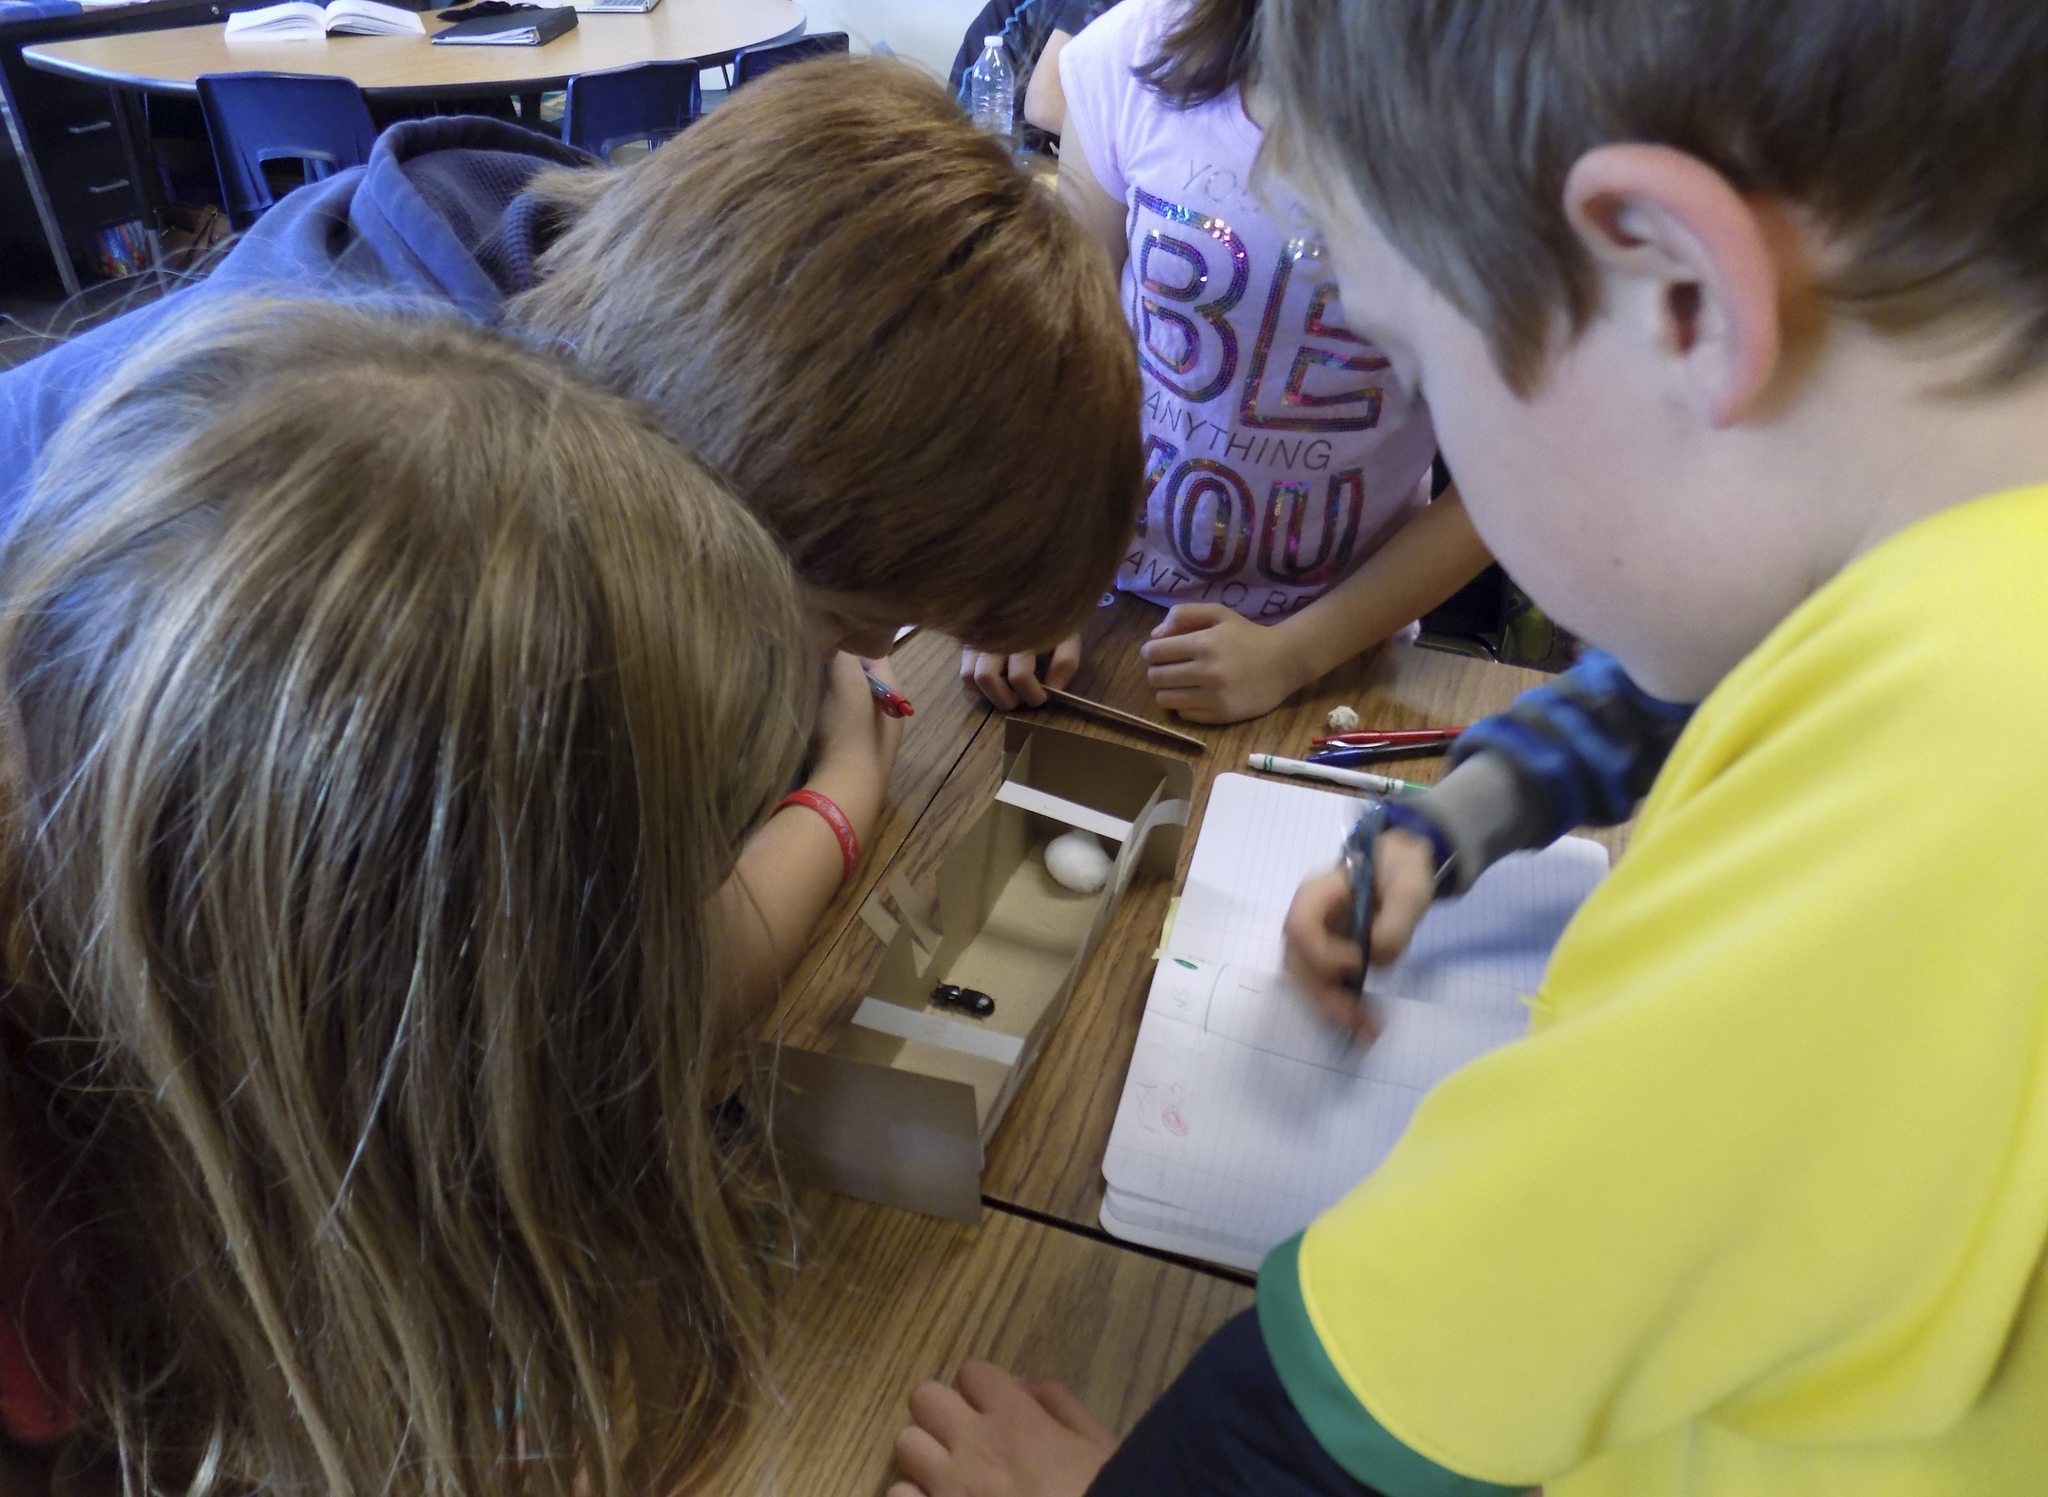 How nutritious are crickets? Local students explore edible insects